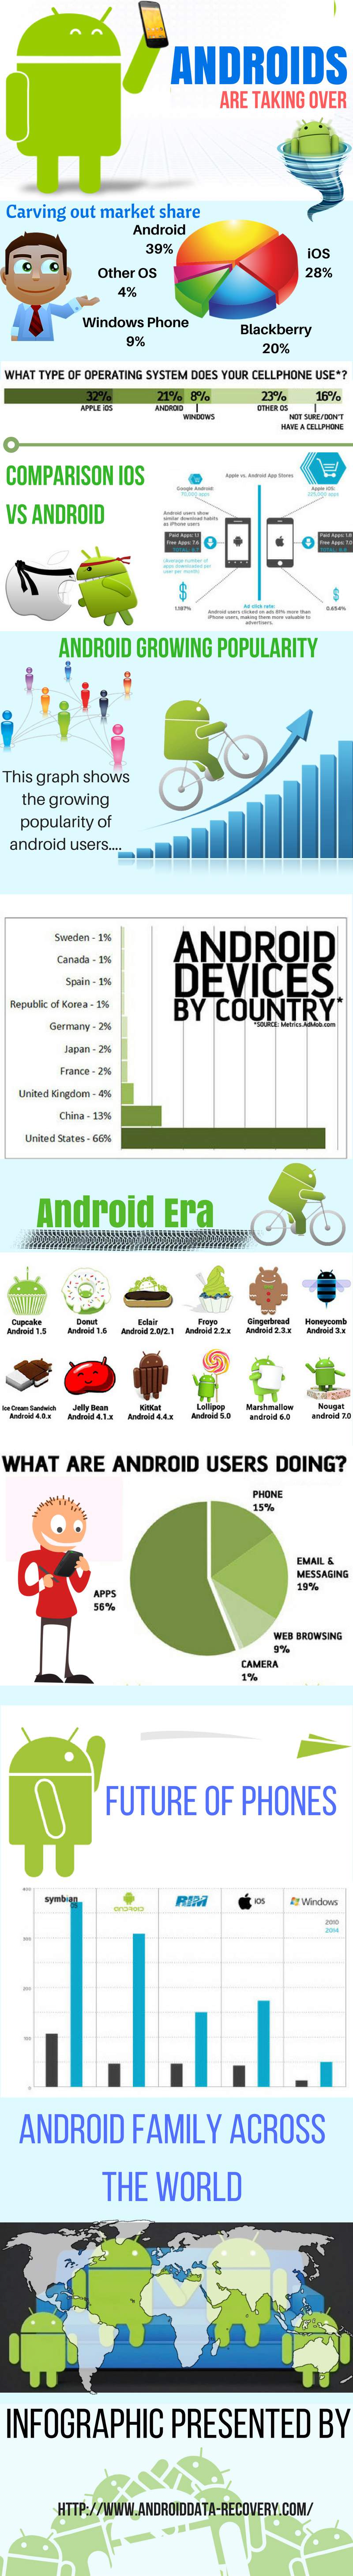 Android Data